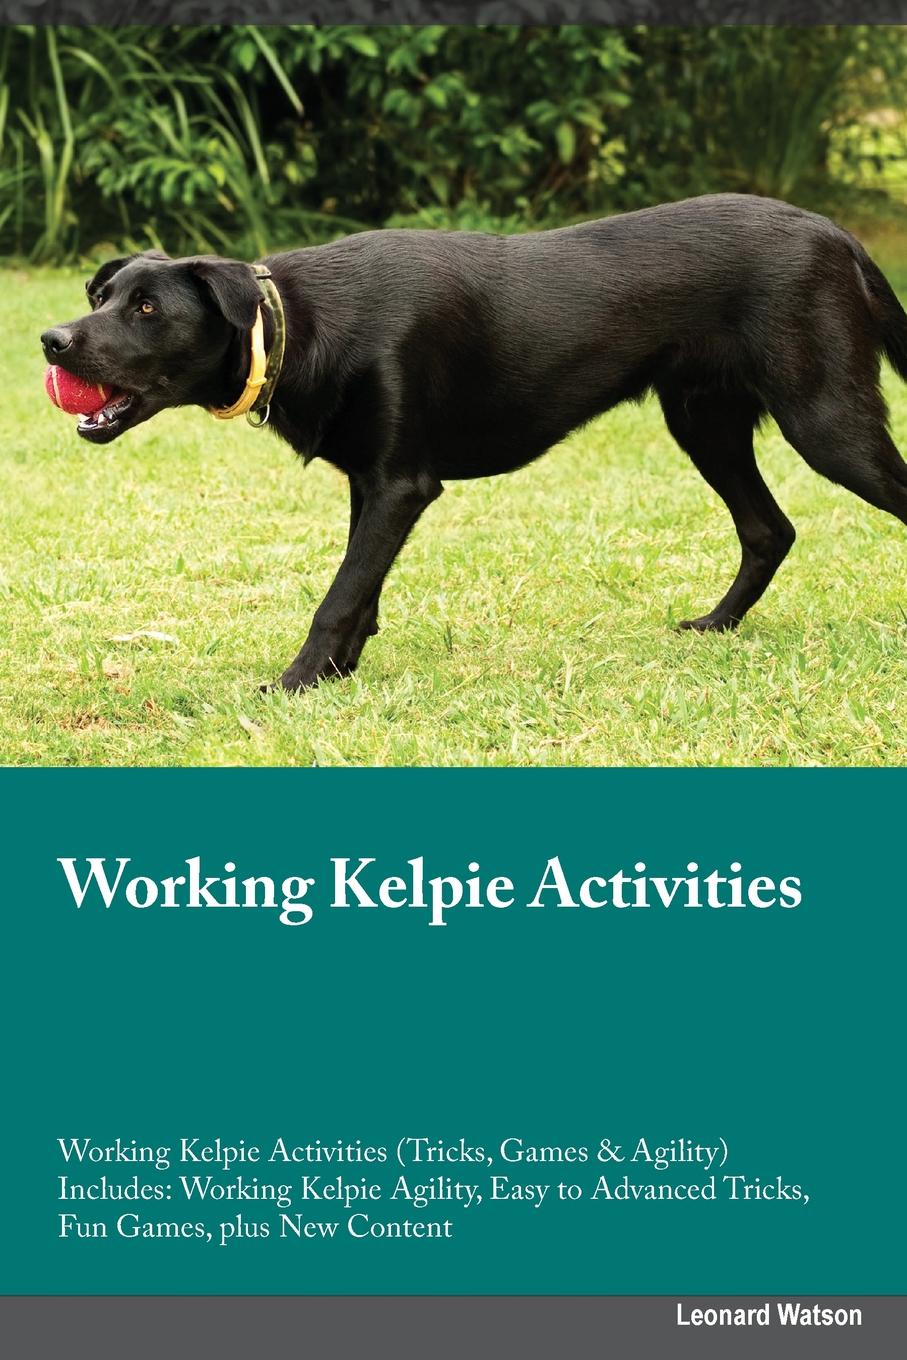 Working Kelpie Training Guide Working Kelpie Training Guide (Tricks, Games & Agility) Includes. Working Kelpie Agility, Easy to Advanced Tricks, Fun Games, plus New Content